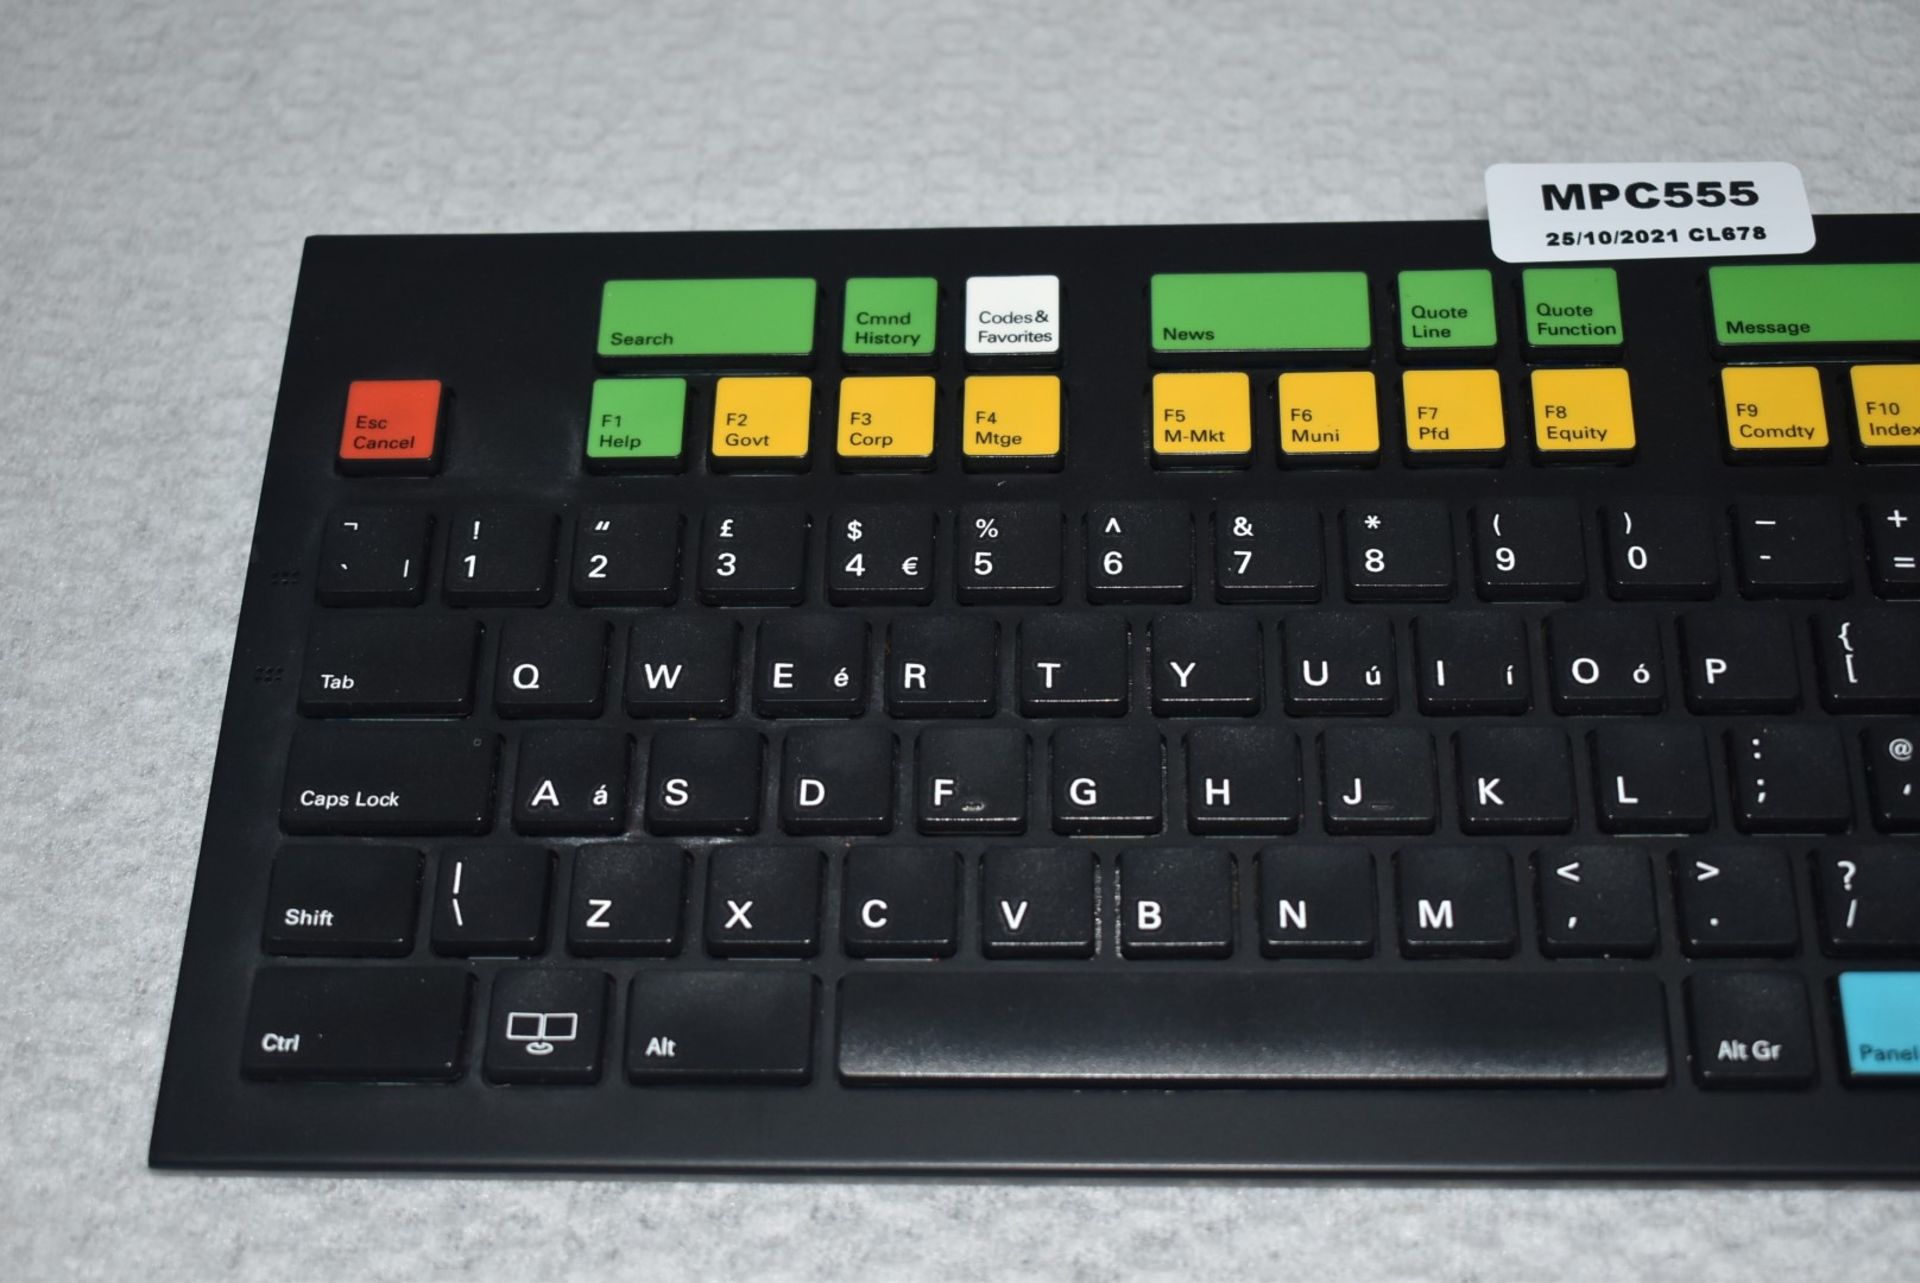 1 x Bloomberg STB100 Financial/Trading Keyboard with Fingerprint Scanner - Ref: MPC555 CG - - Image 2 of 4